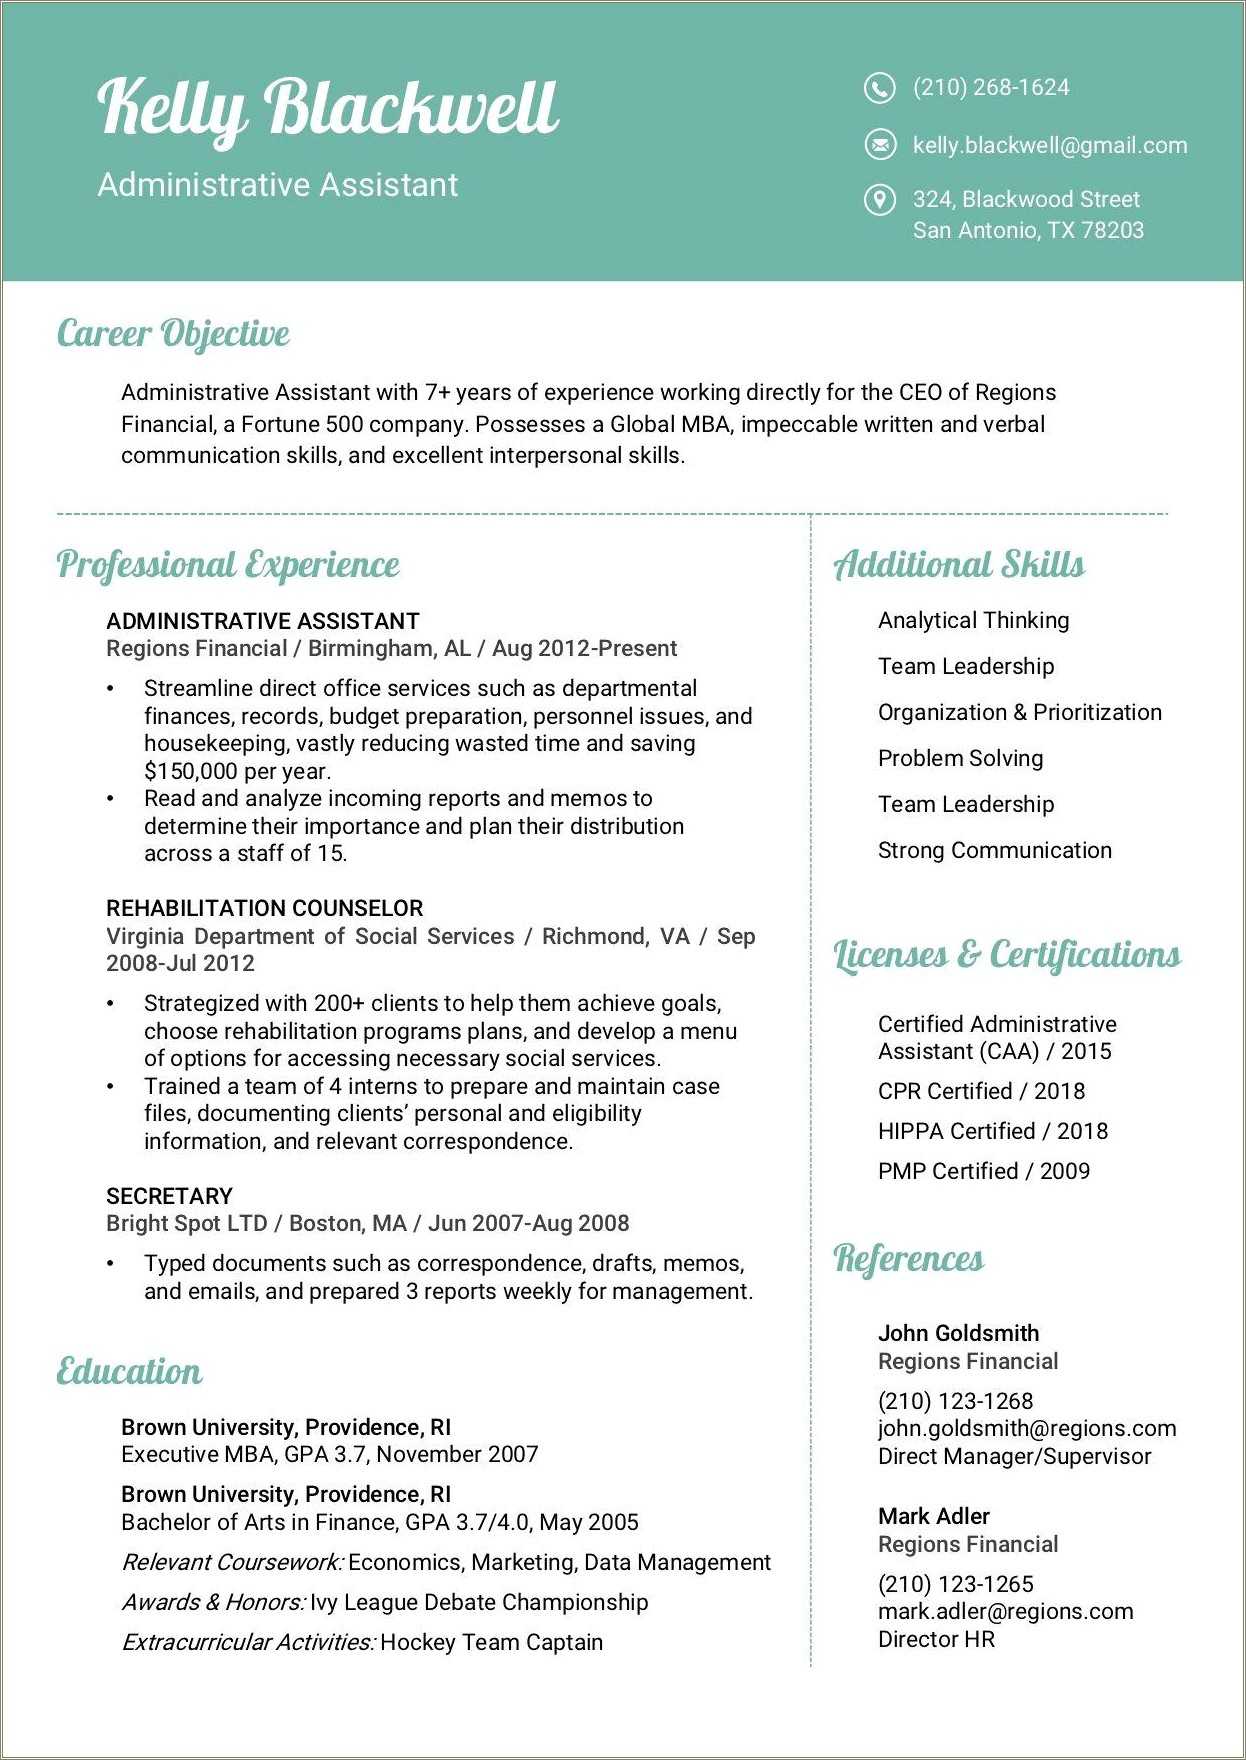 Interpersonal Skills Example For Resume - Resume Example Gallery